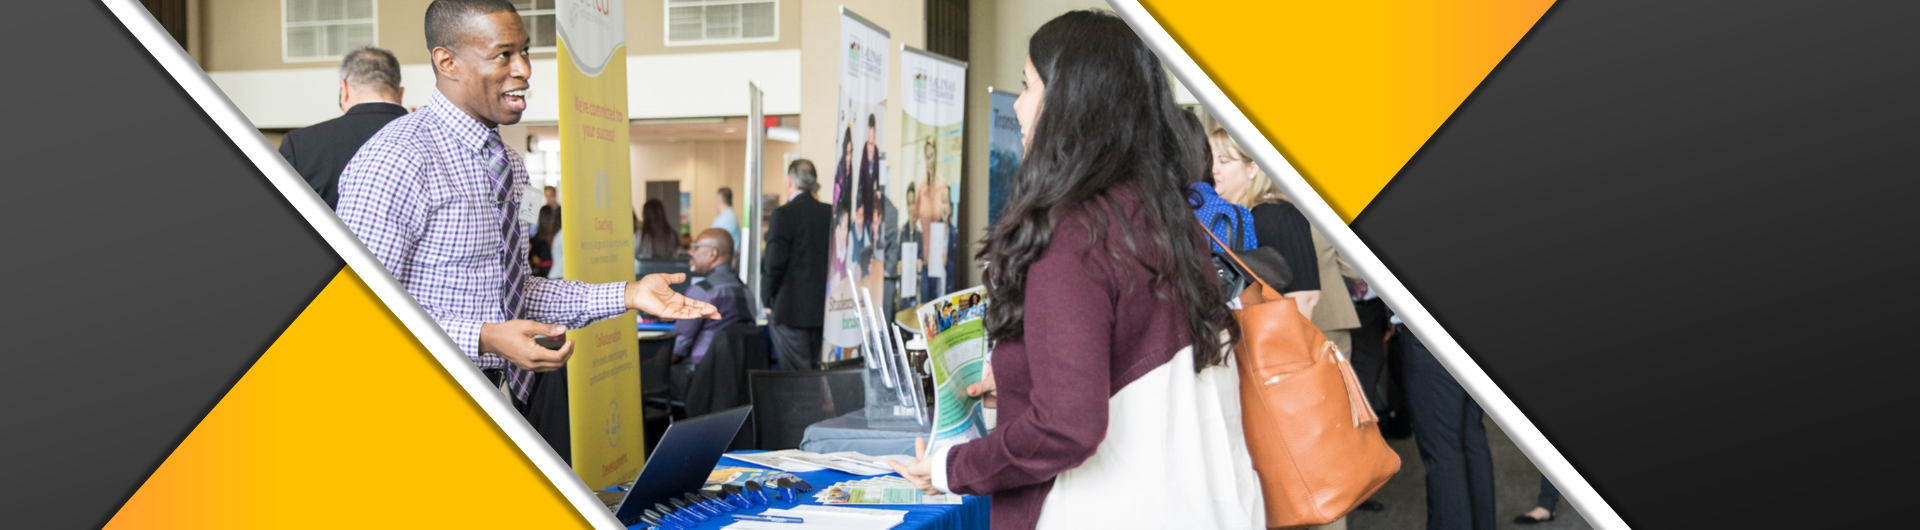 Making the Most of the Job Fair California State University Long Beach